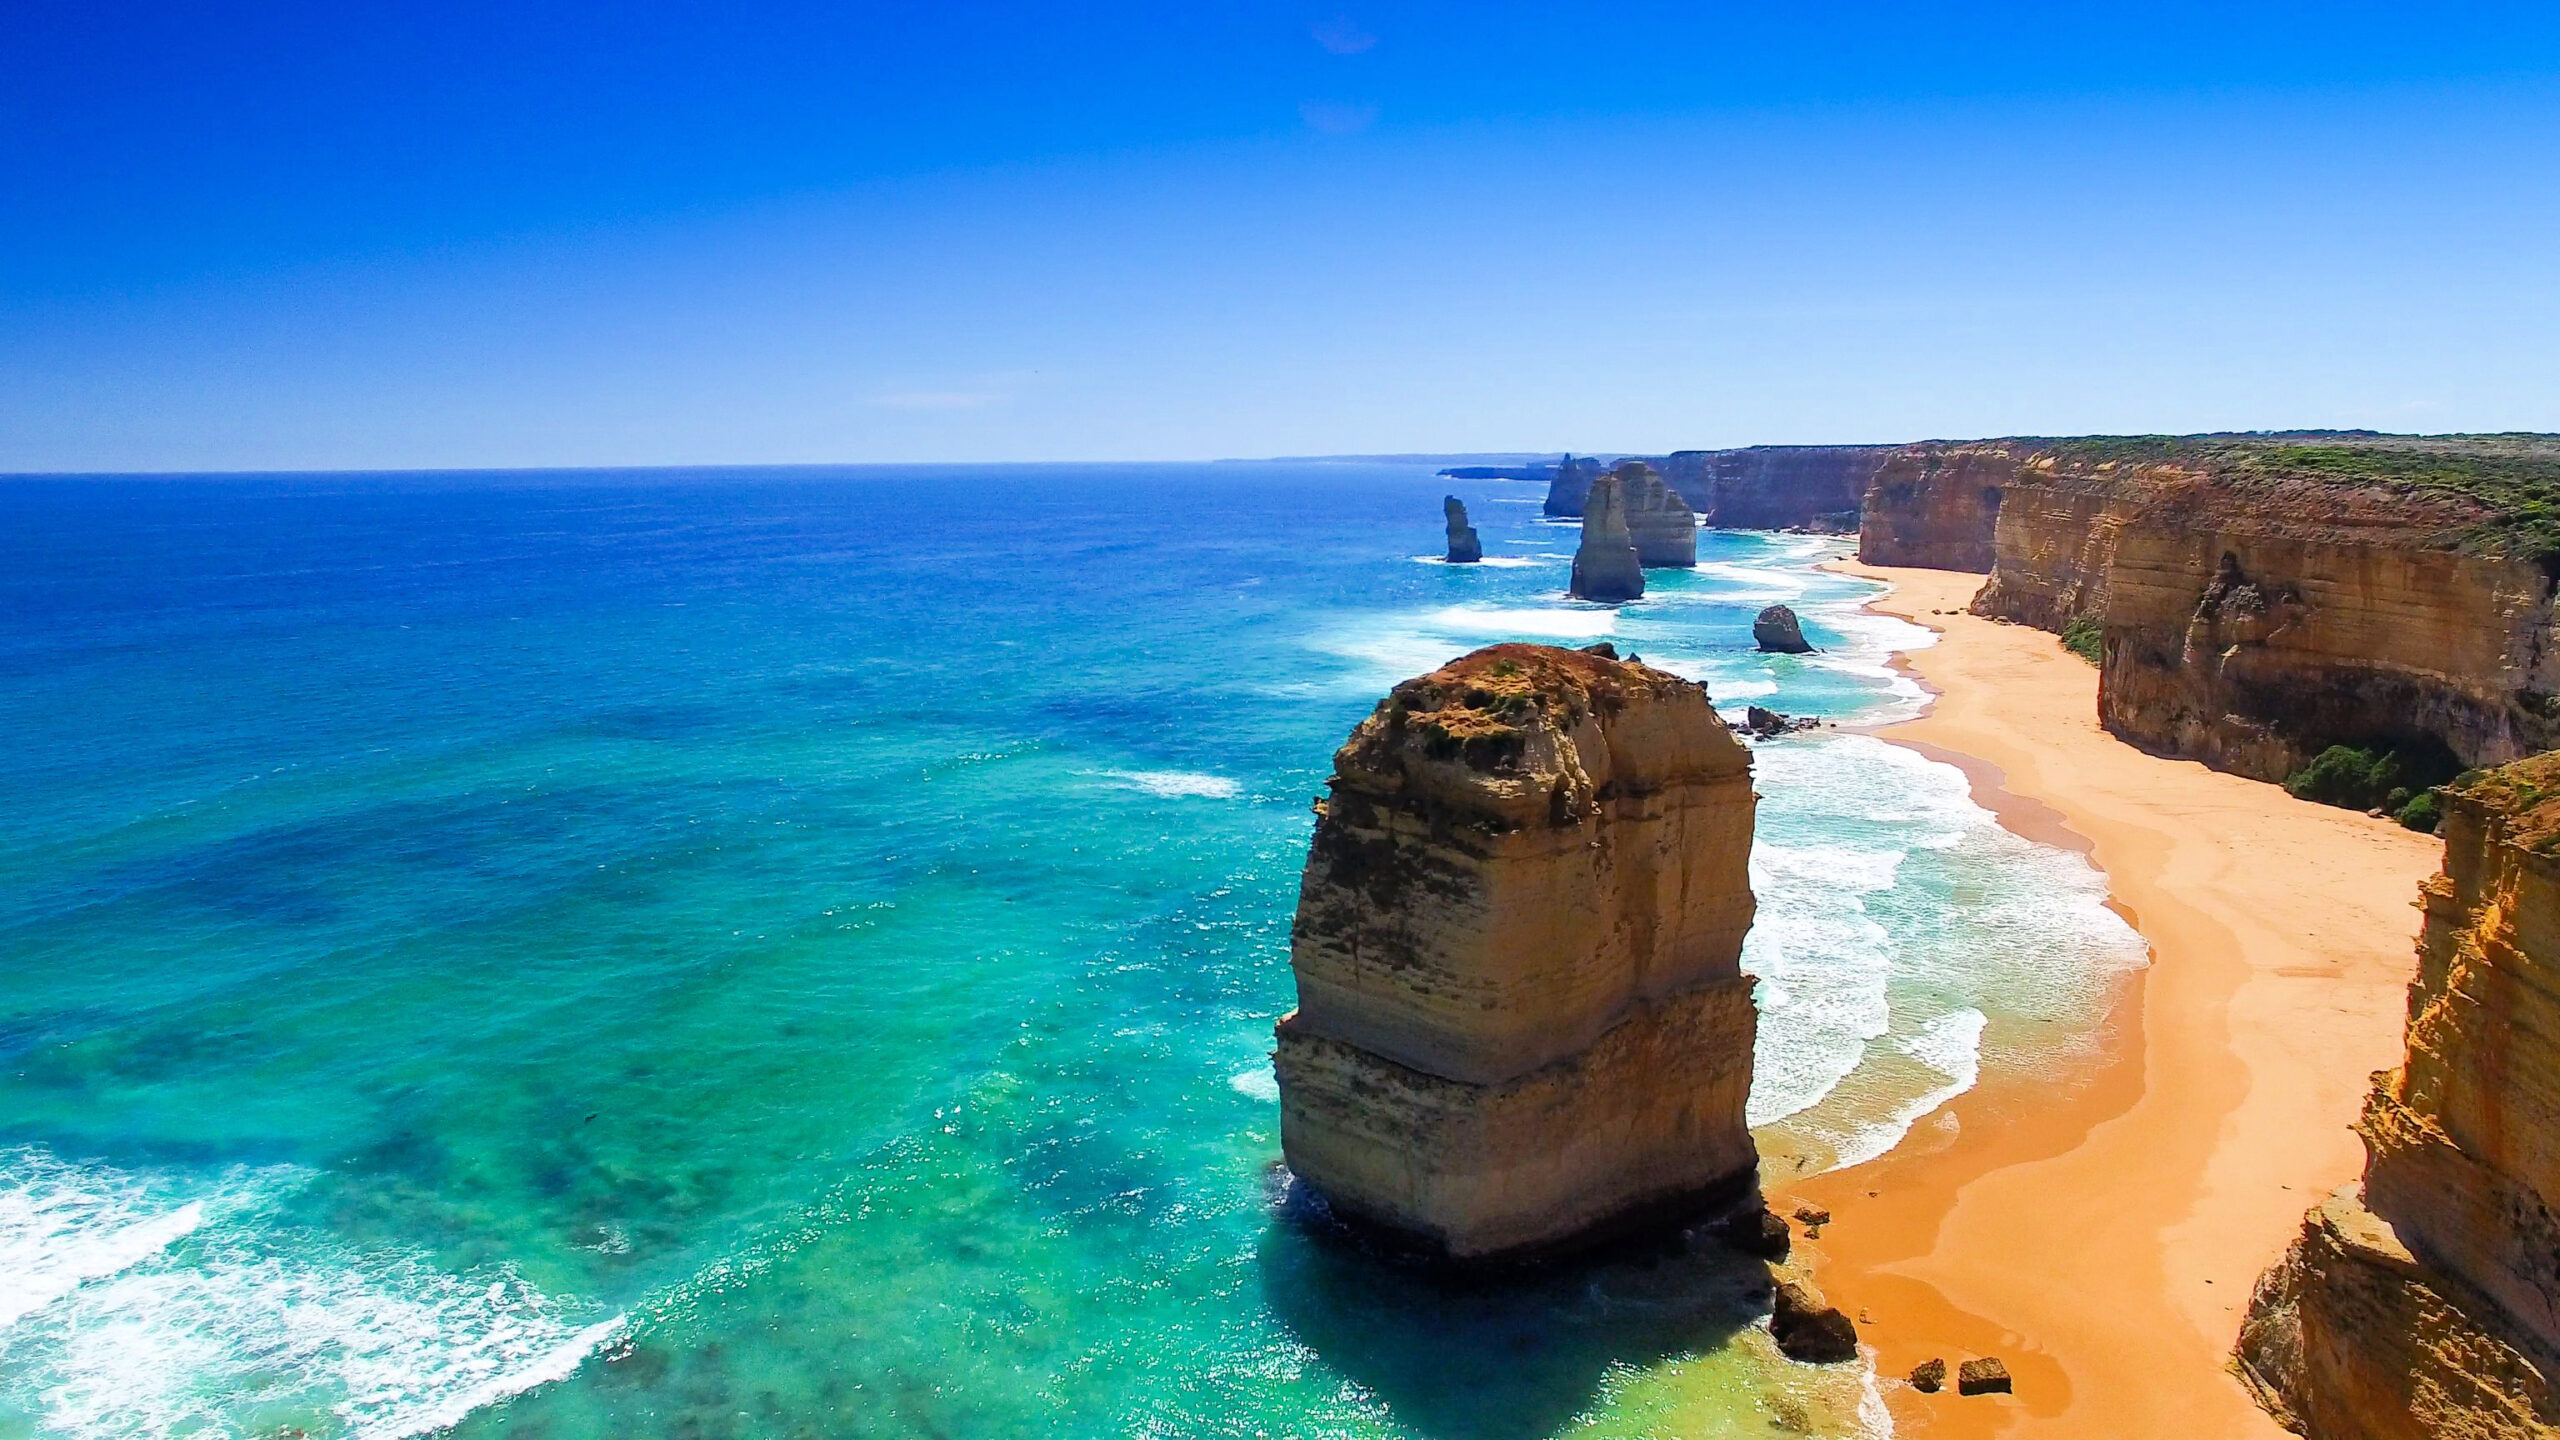 Several of the 12 Apostles just off the coast along the Great Ocean Road in Victoria, Australia